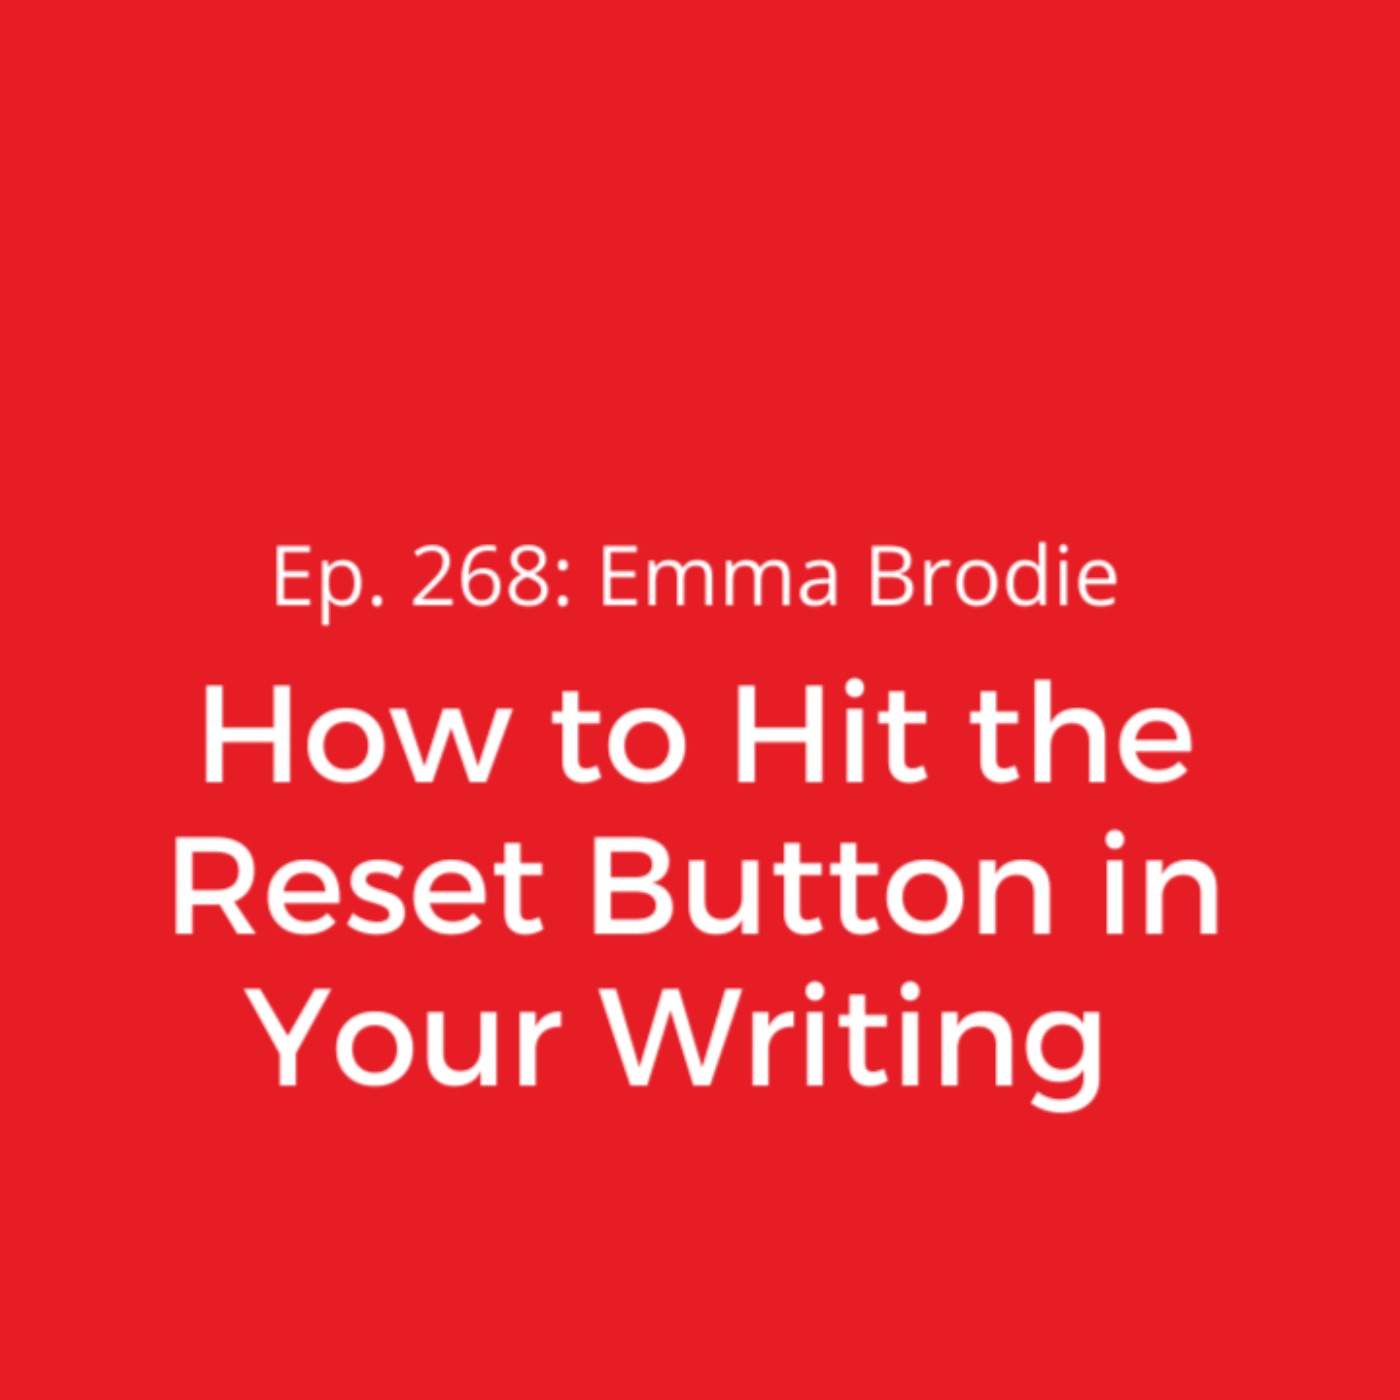 Ep. 268: Emma Brodie on How to Hit the Reset Button in Your Writing